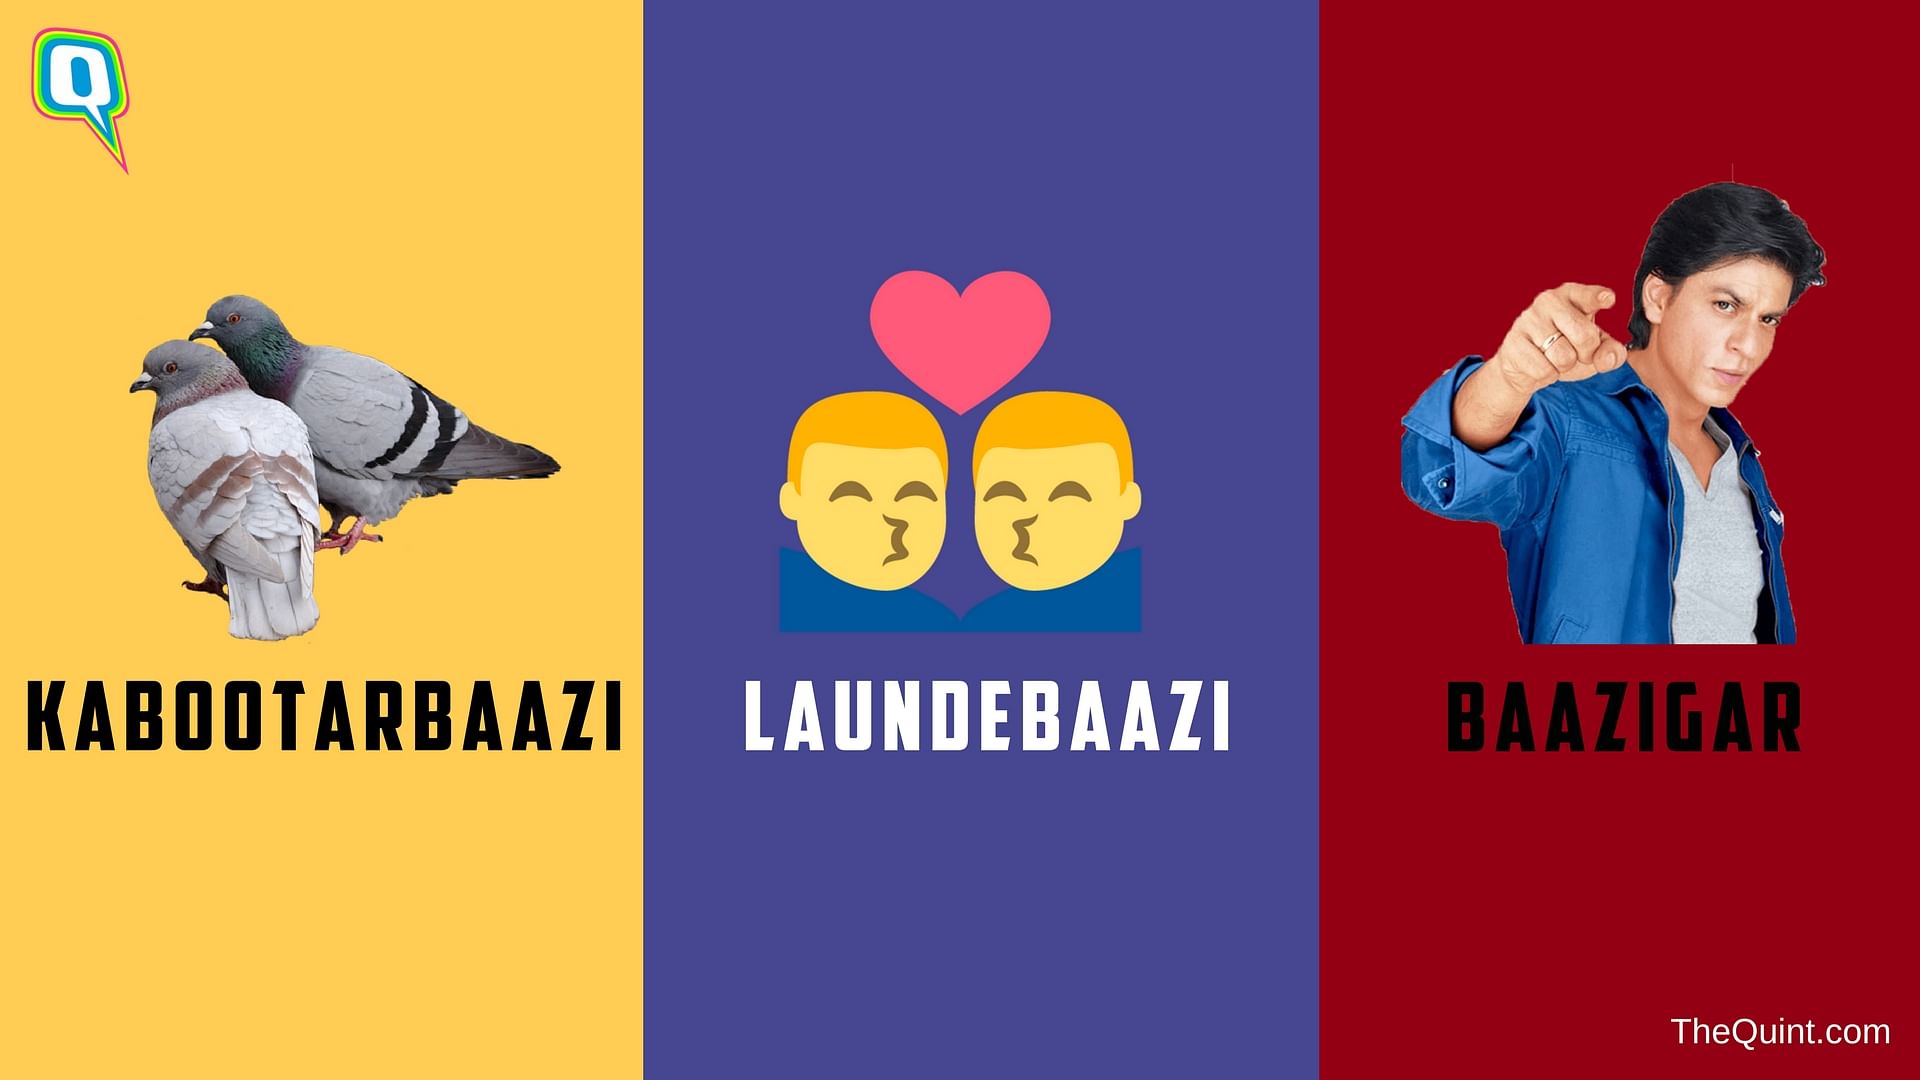 Baazi, an Urdu word that literally means a game or a bet, has been appropriated to mean many things.